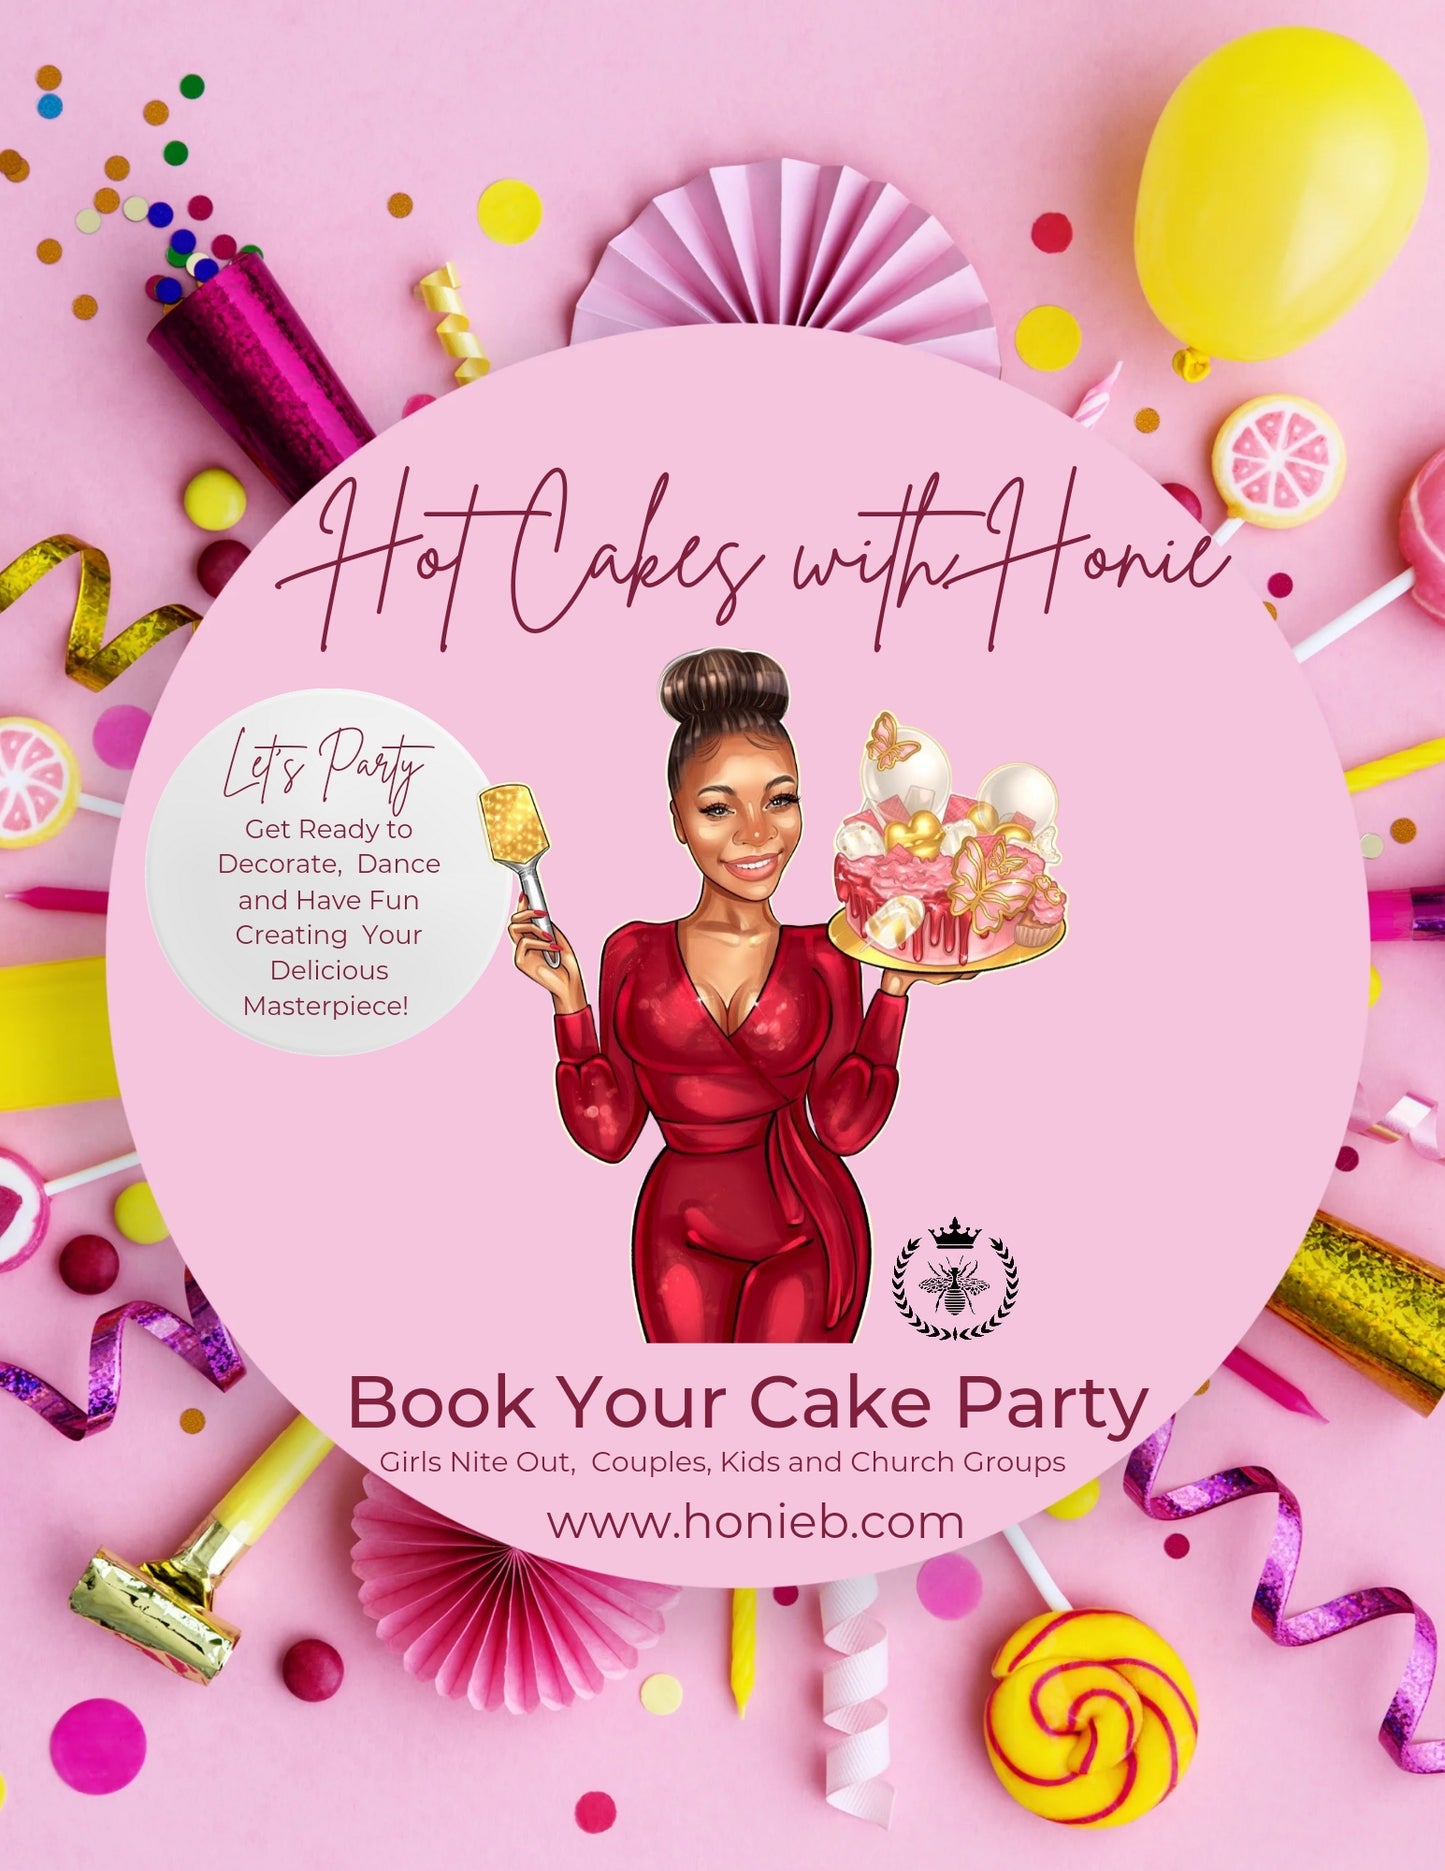 Caking with A Twist - Hot Cakes With Honie Cake Party